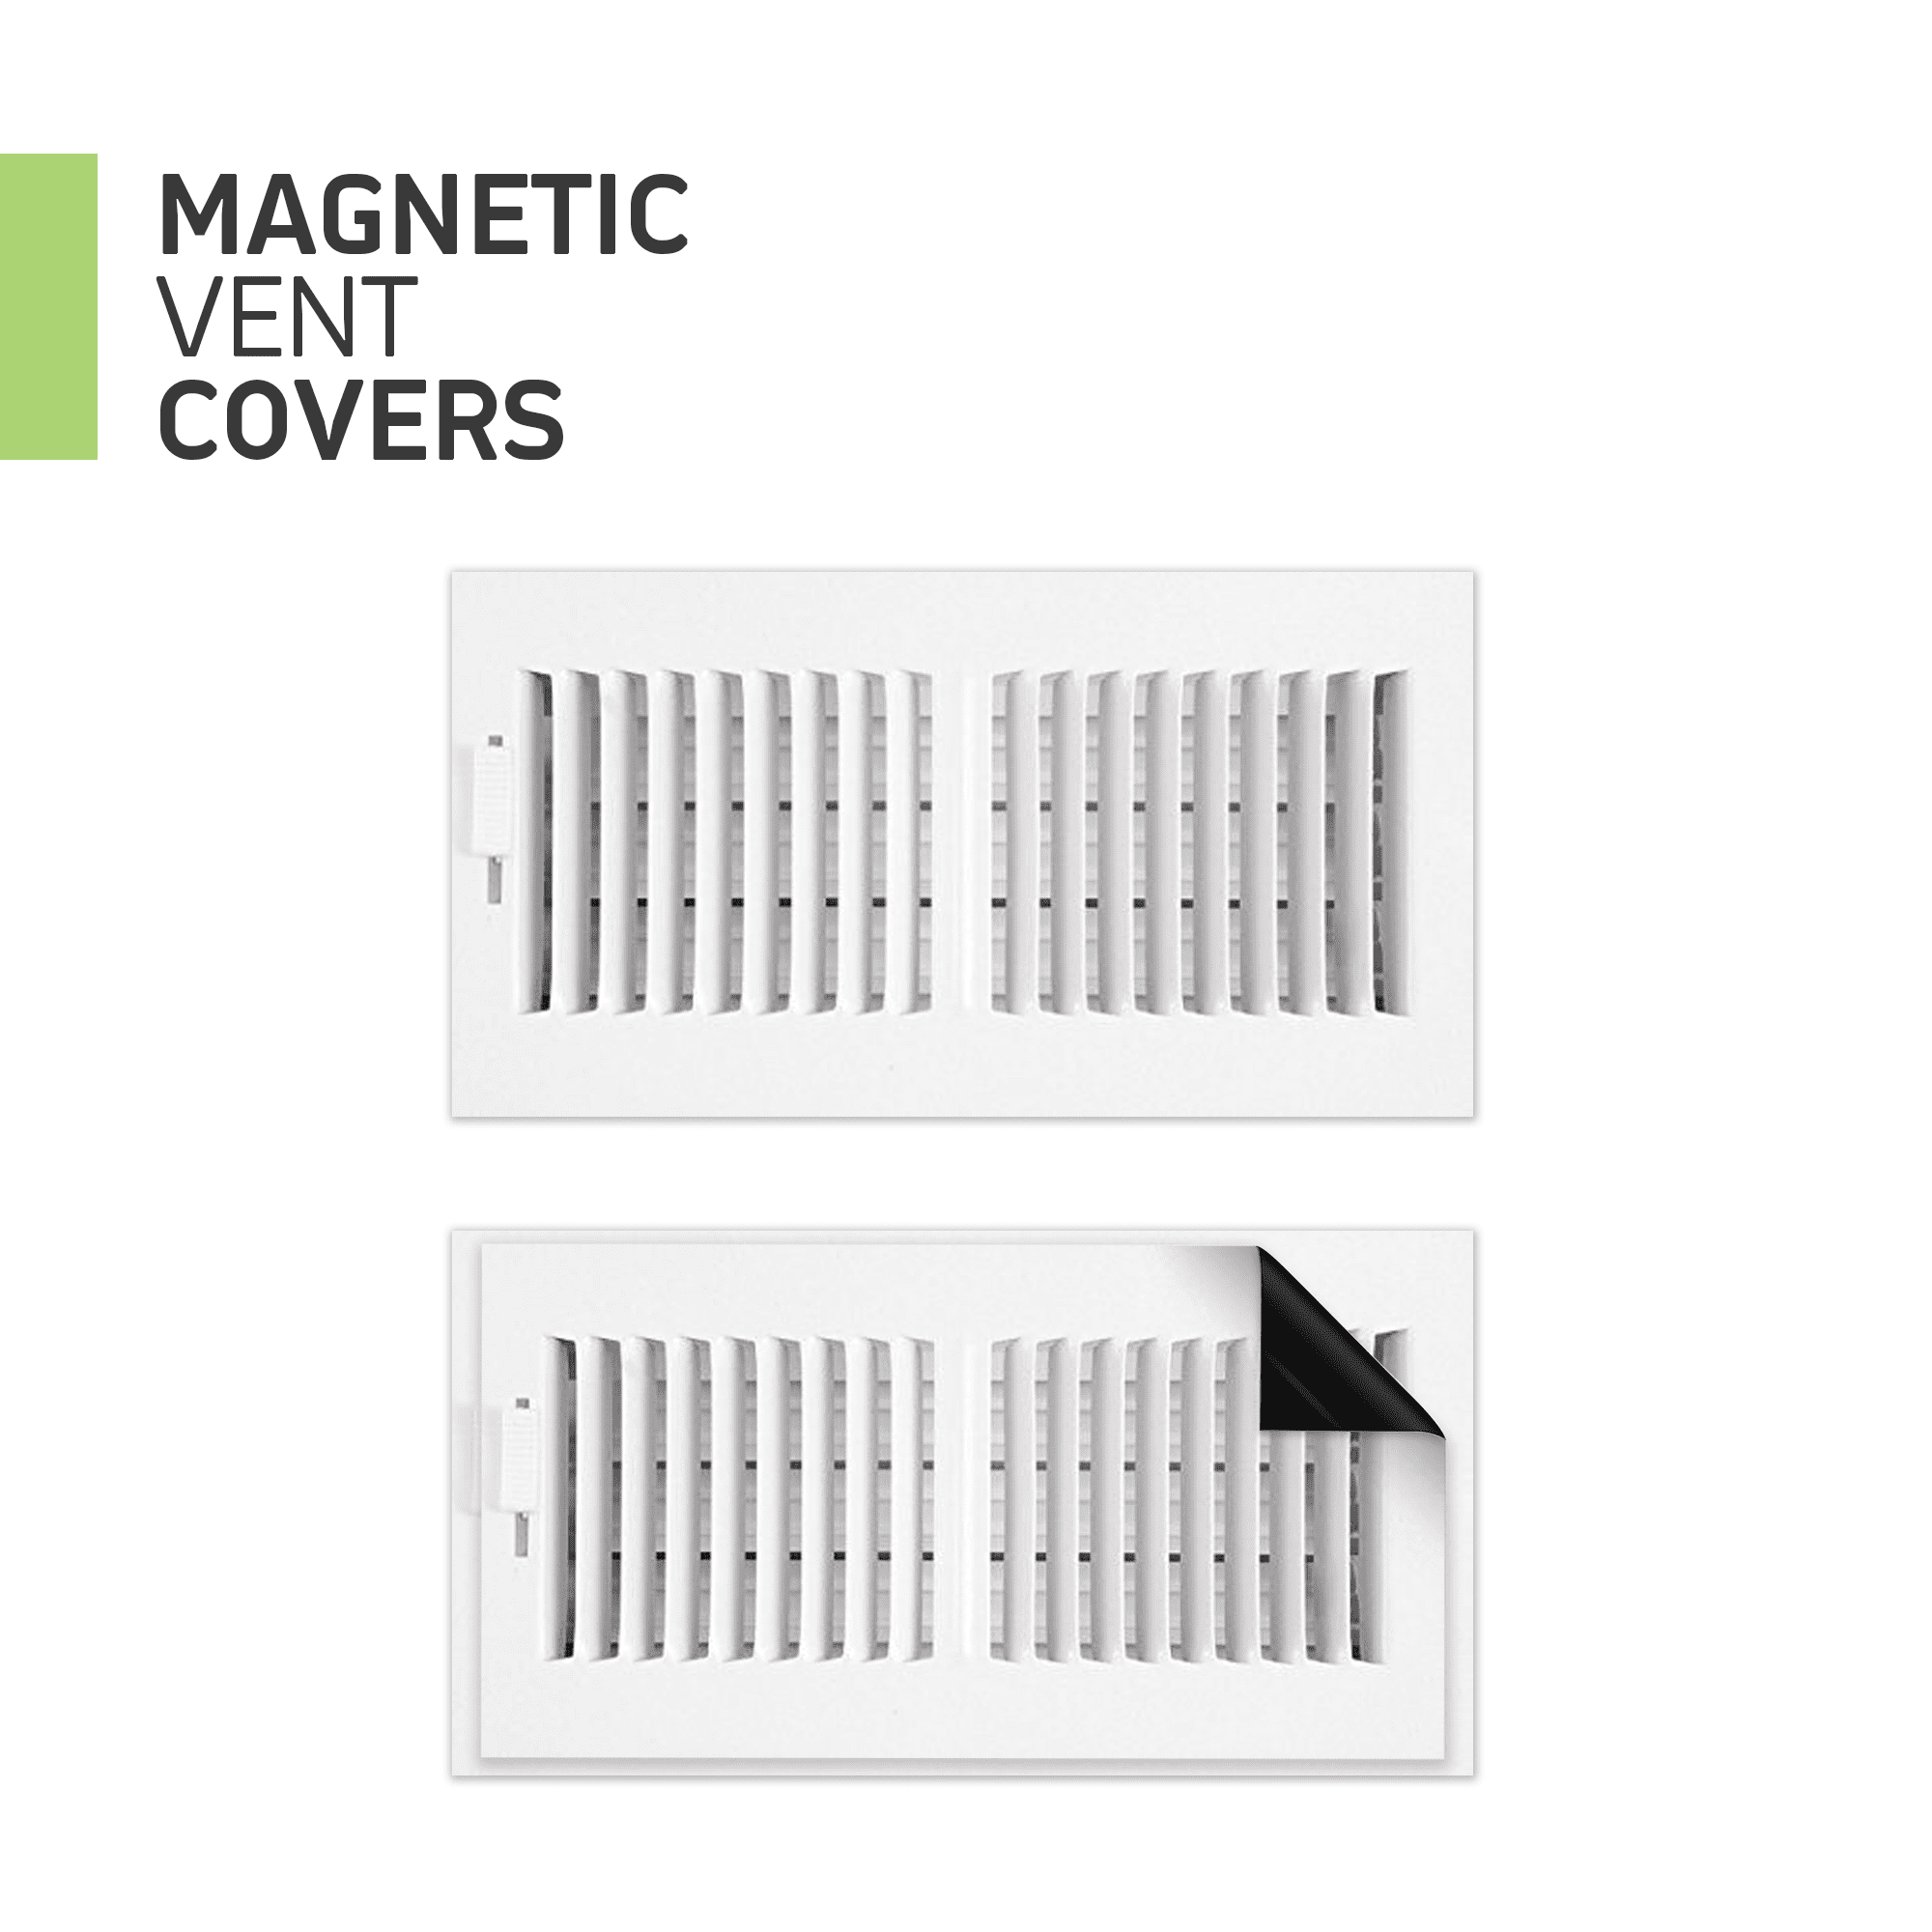 DIYMAG 4Pack Strong Magnetic Vent Covers, Vent Covers for Home Floor  Standard Air Registers, 8 inch